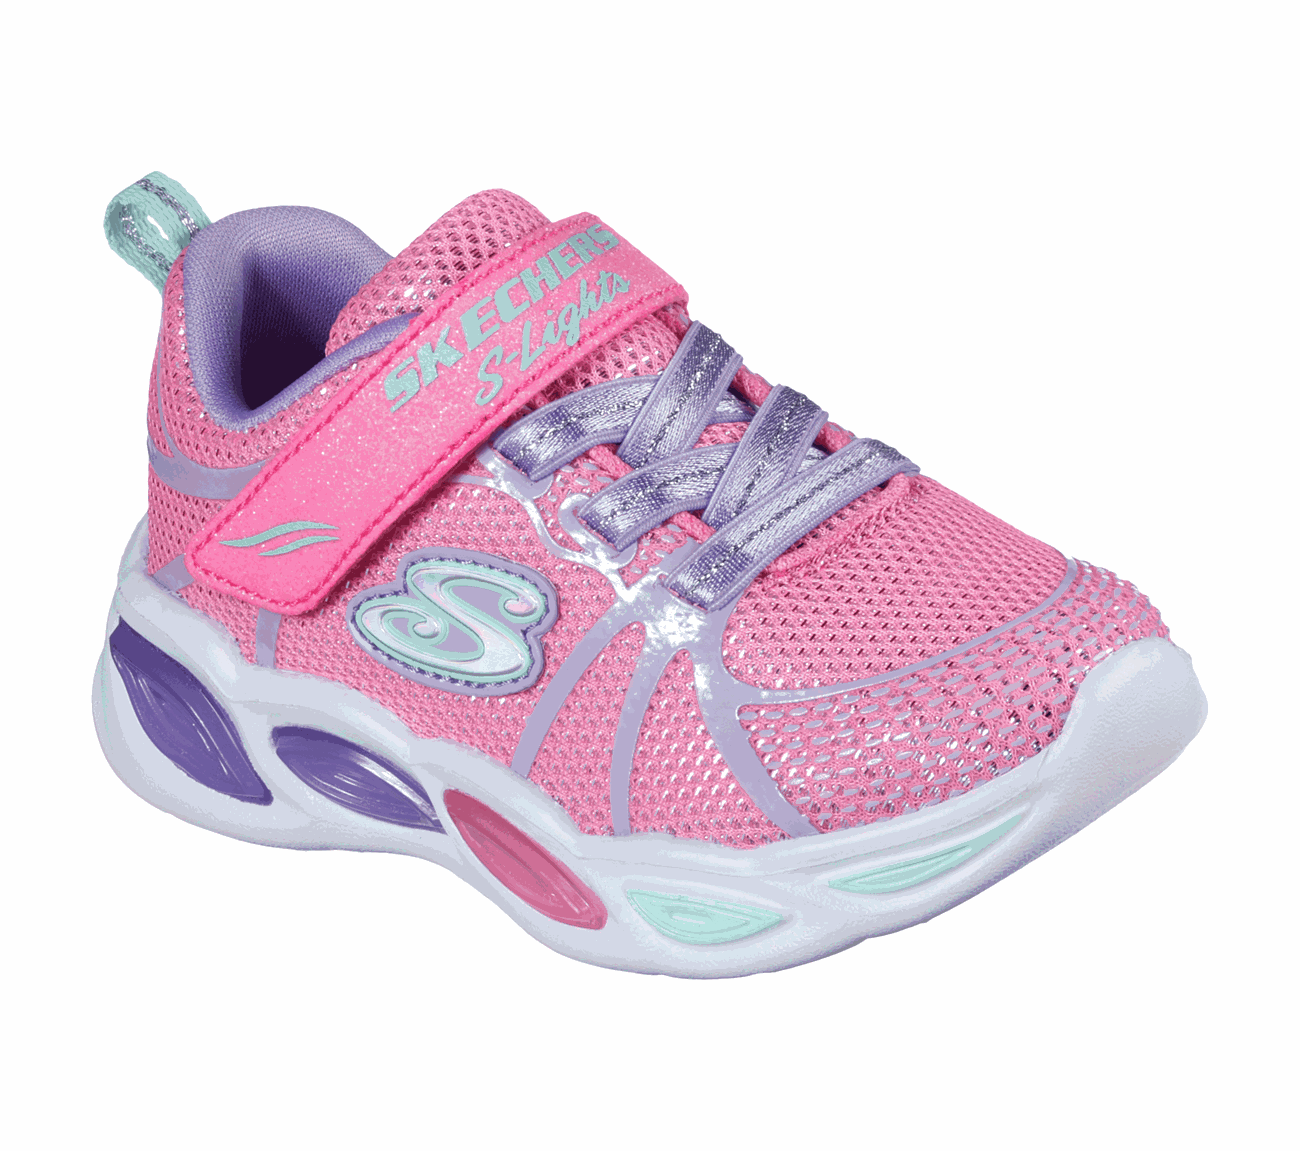 Buy SKECHERS S Lights: Shimmer Beams - Sporty Glow S-Lights Shoes